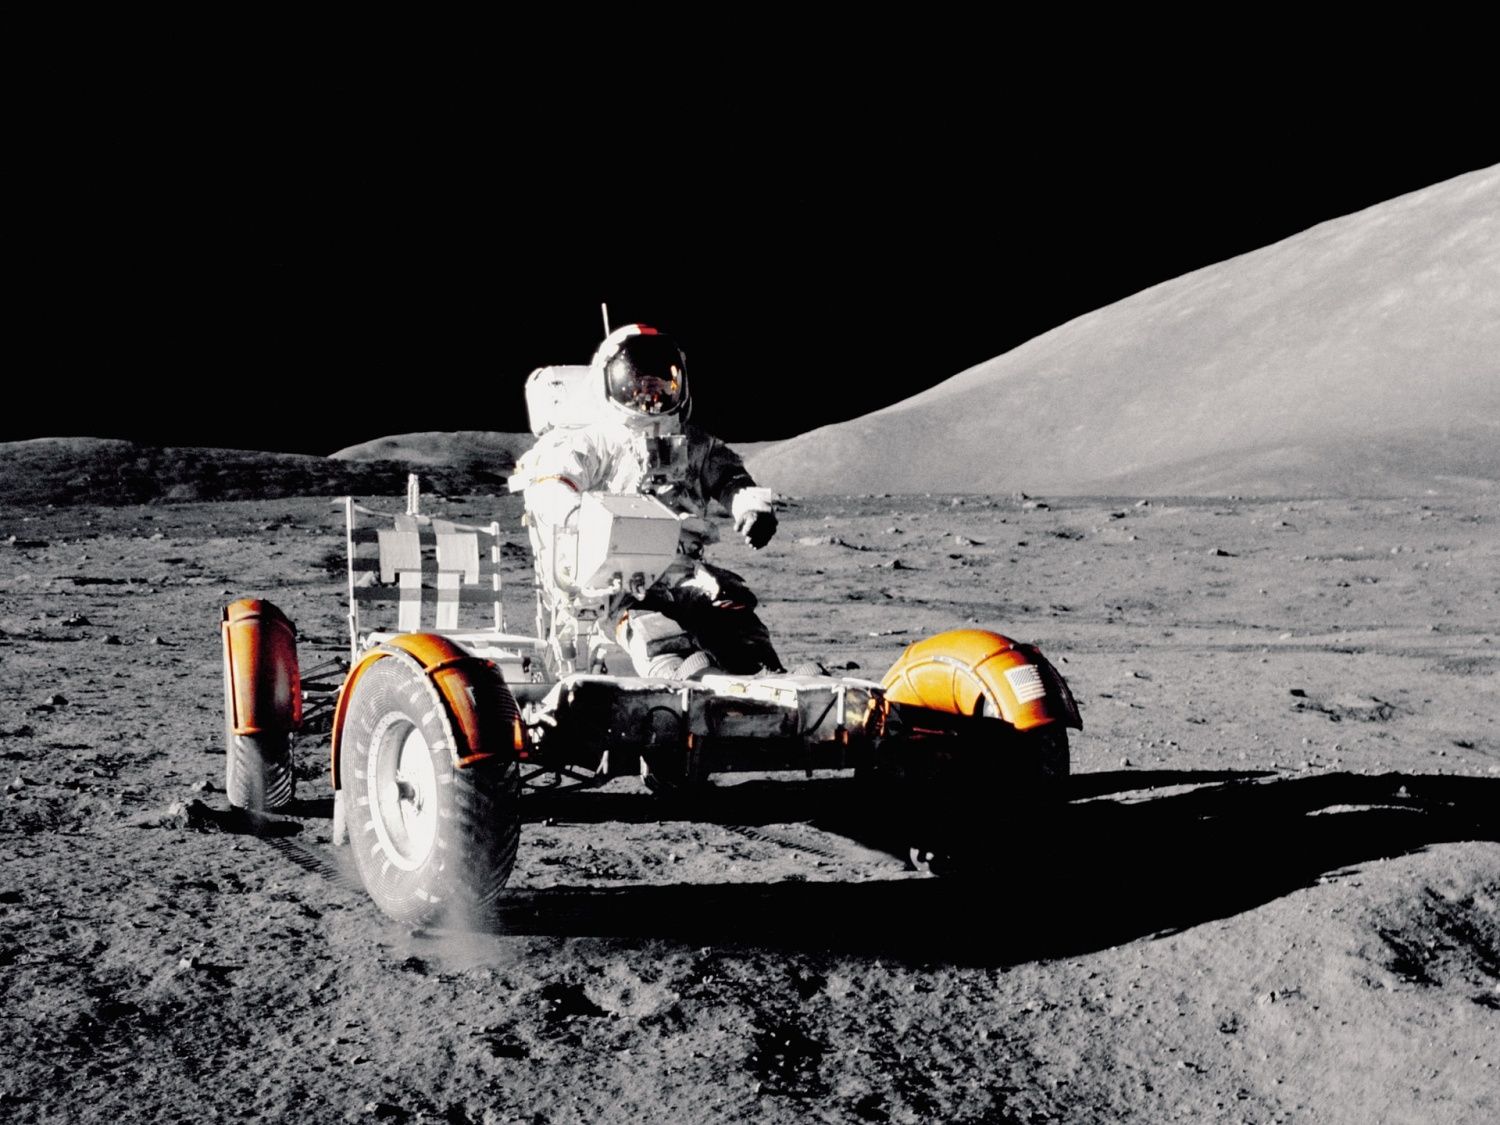 Australian-built rover to head to the moon in 2026